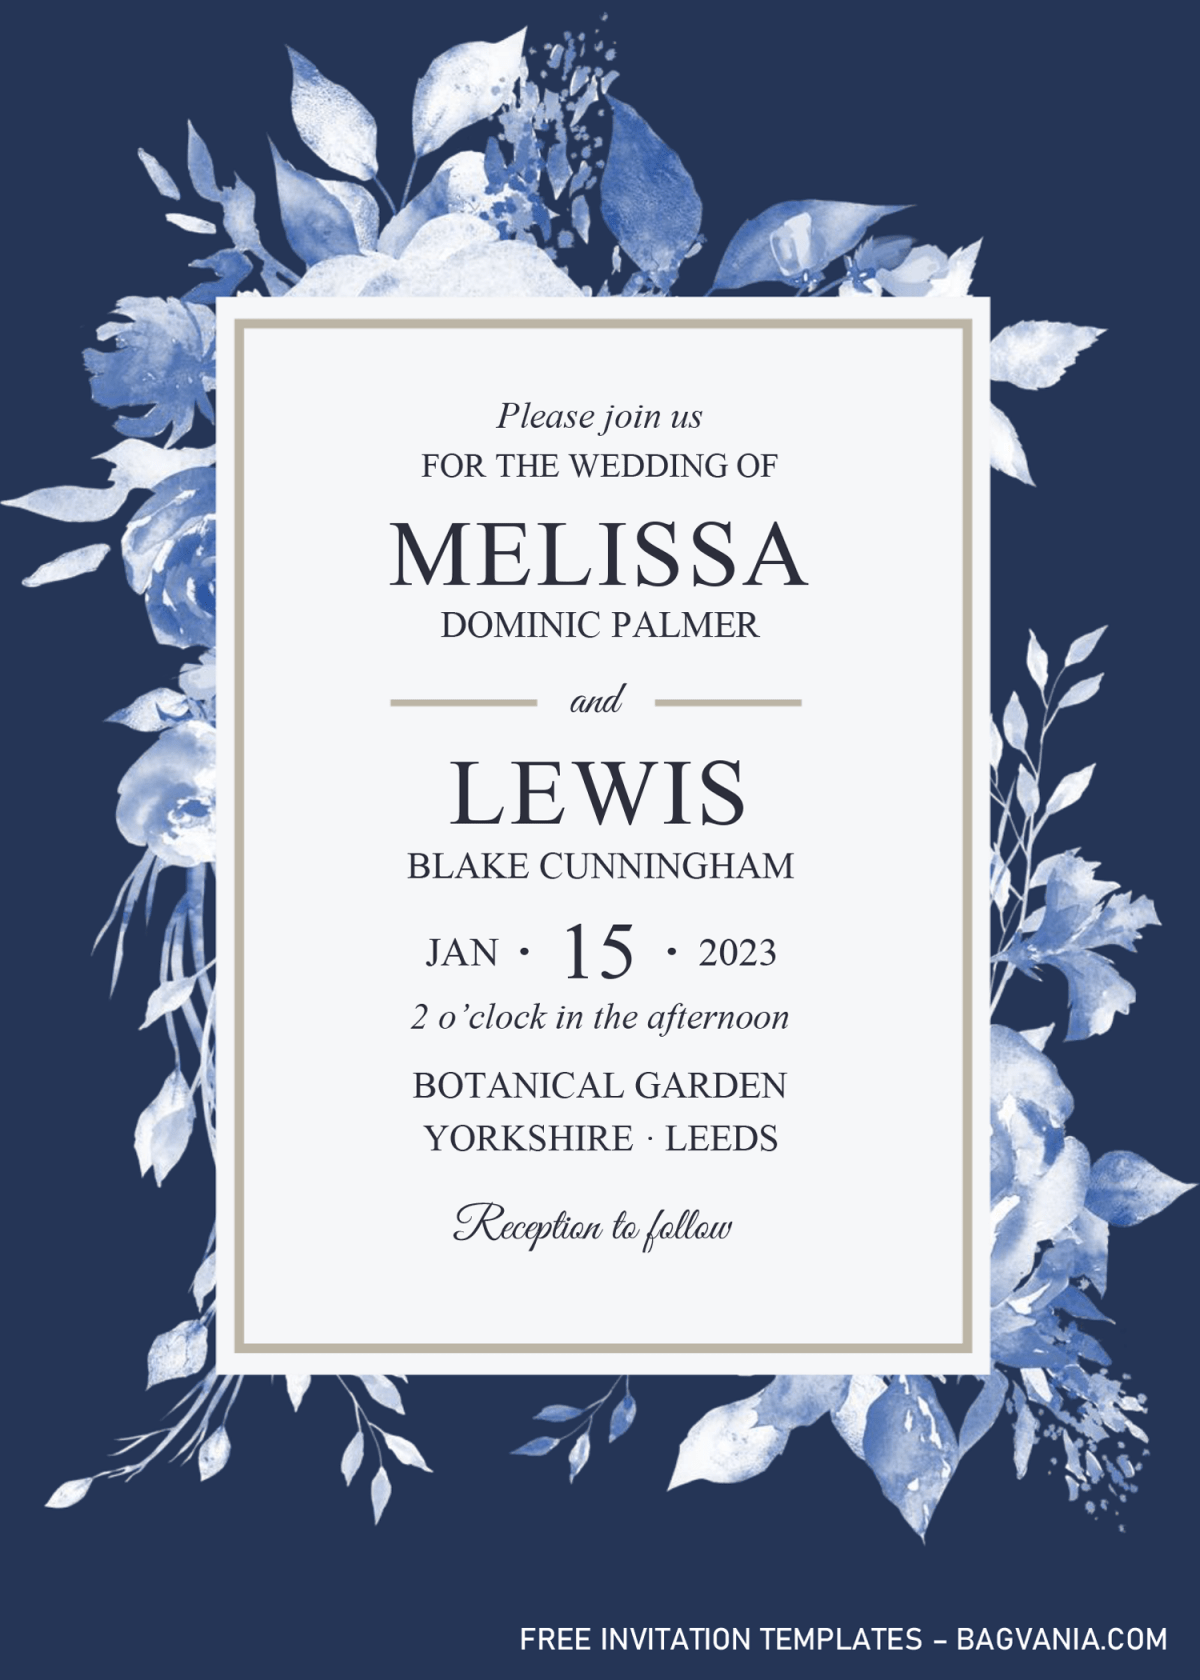 Modern Navy Invitation Templates - Editable With Microsoft Word and has portrait orientation